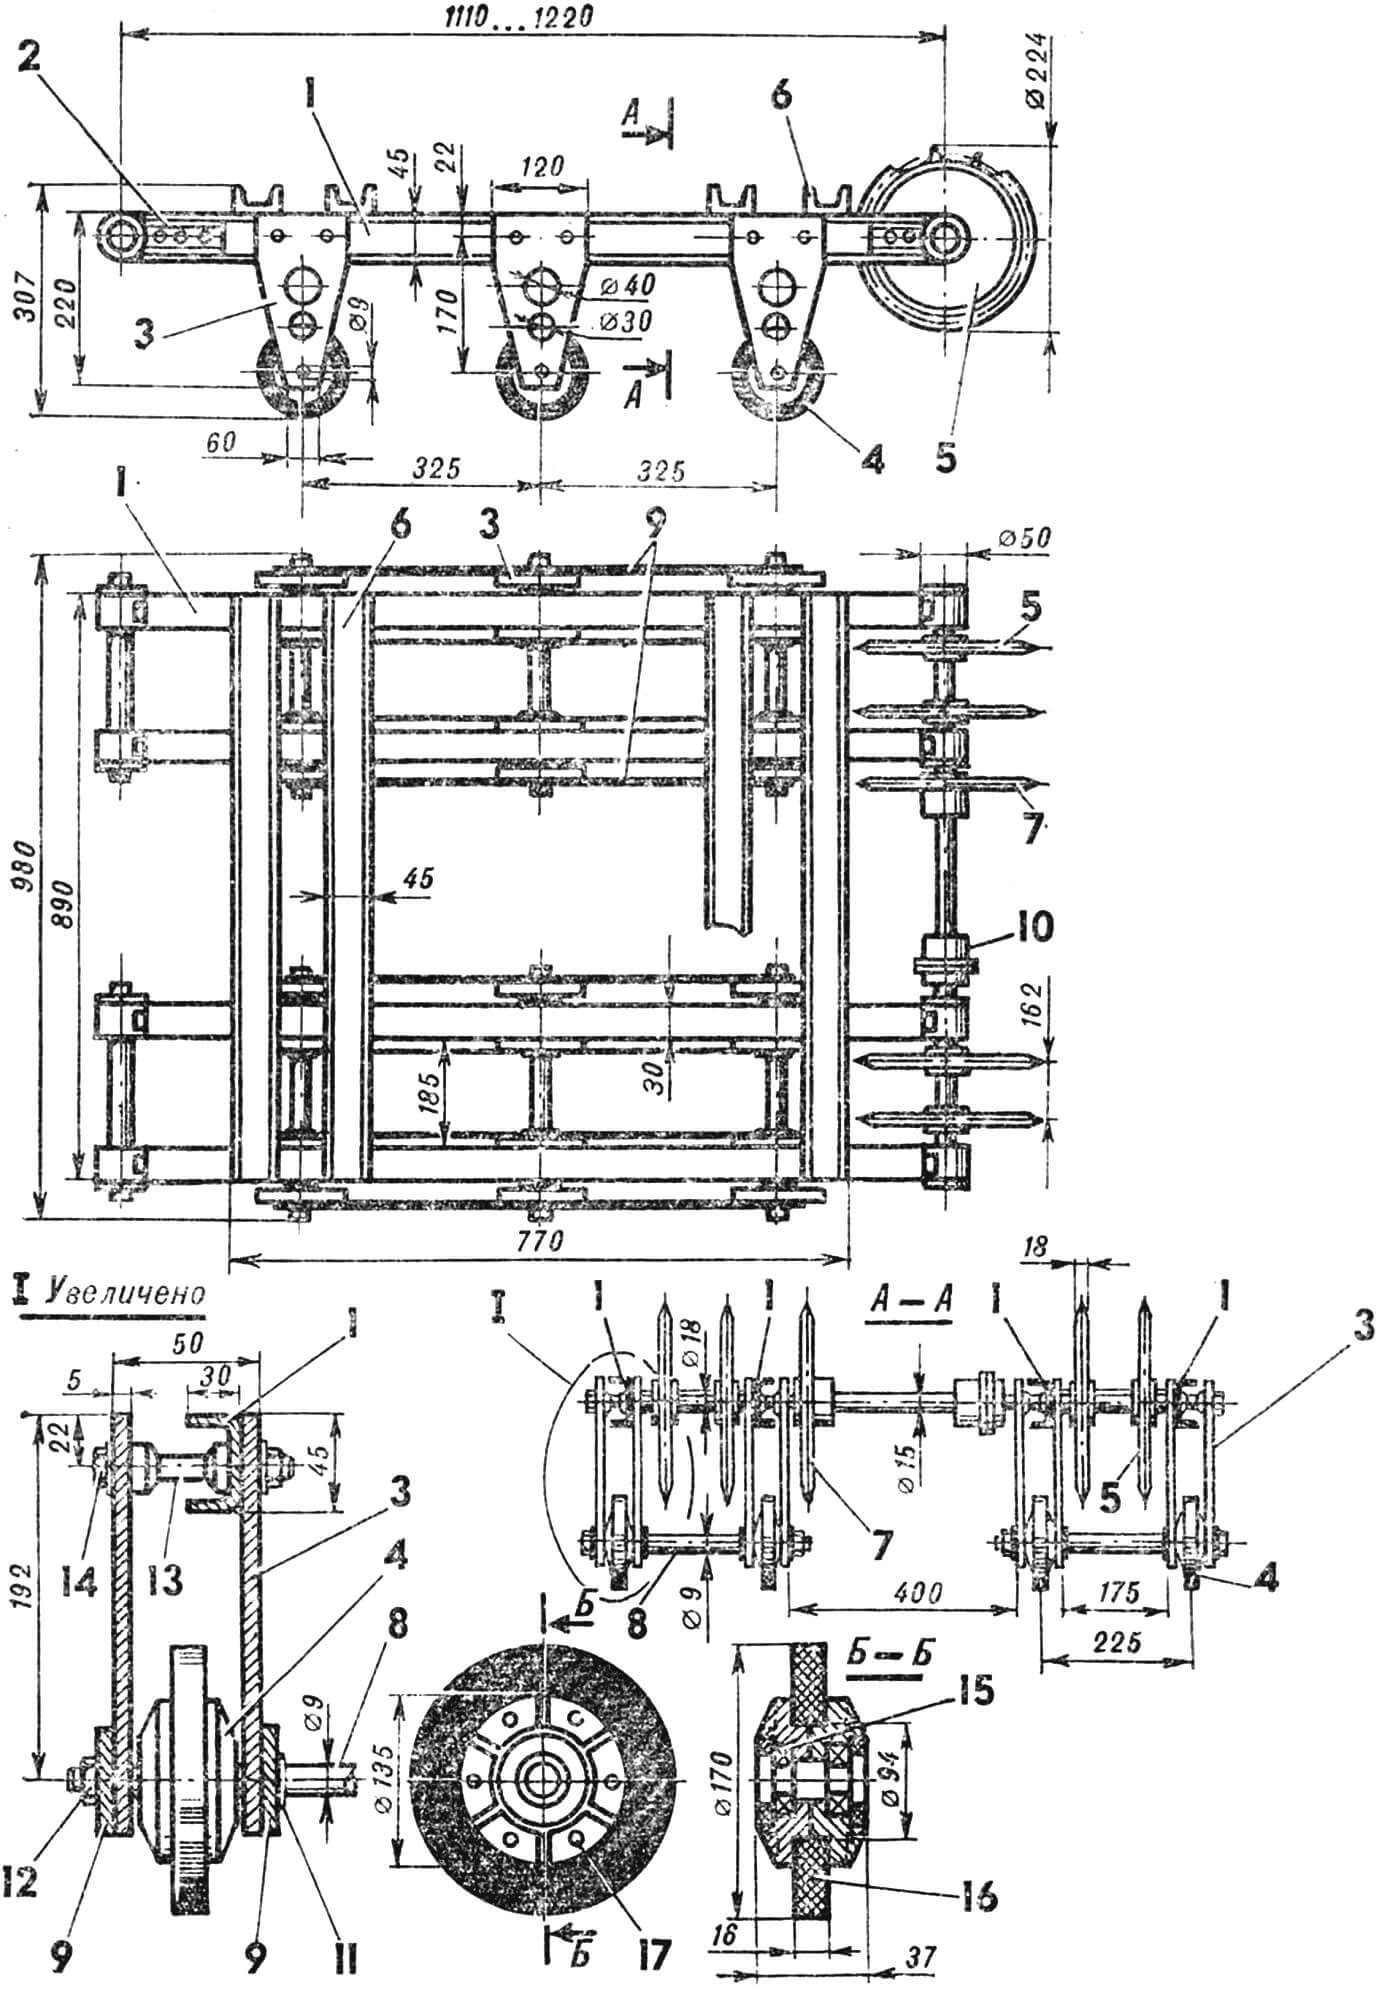 Fig. 2. Running gear frame with drive elements